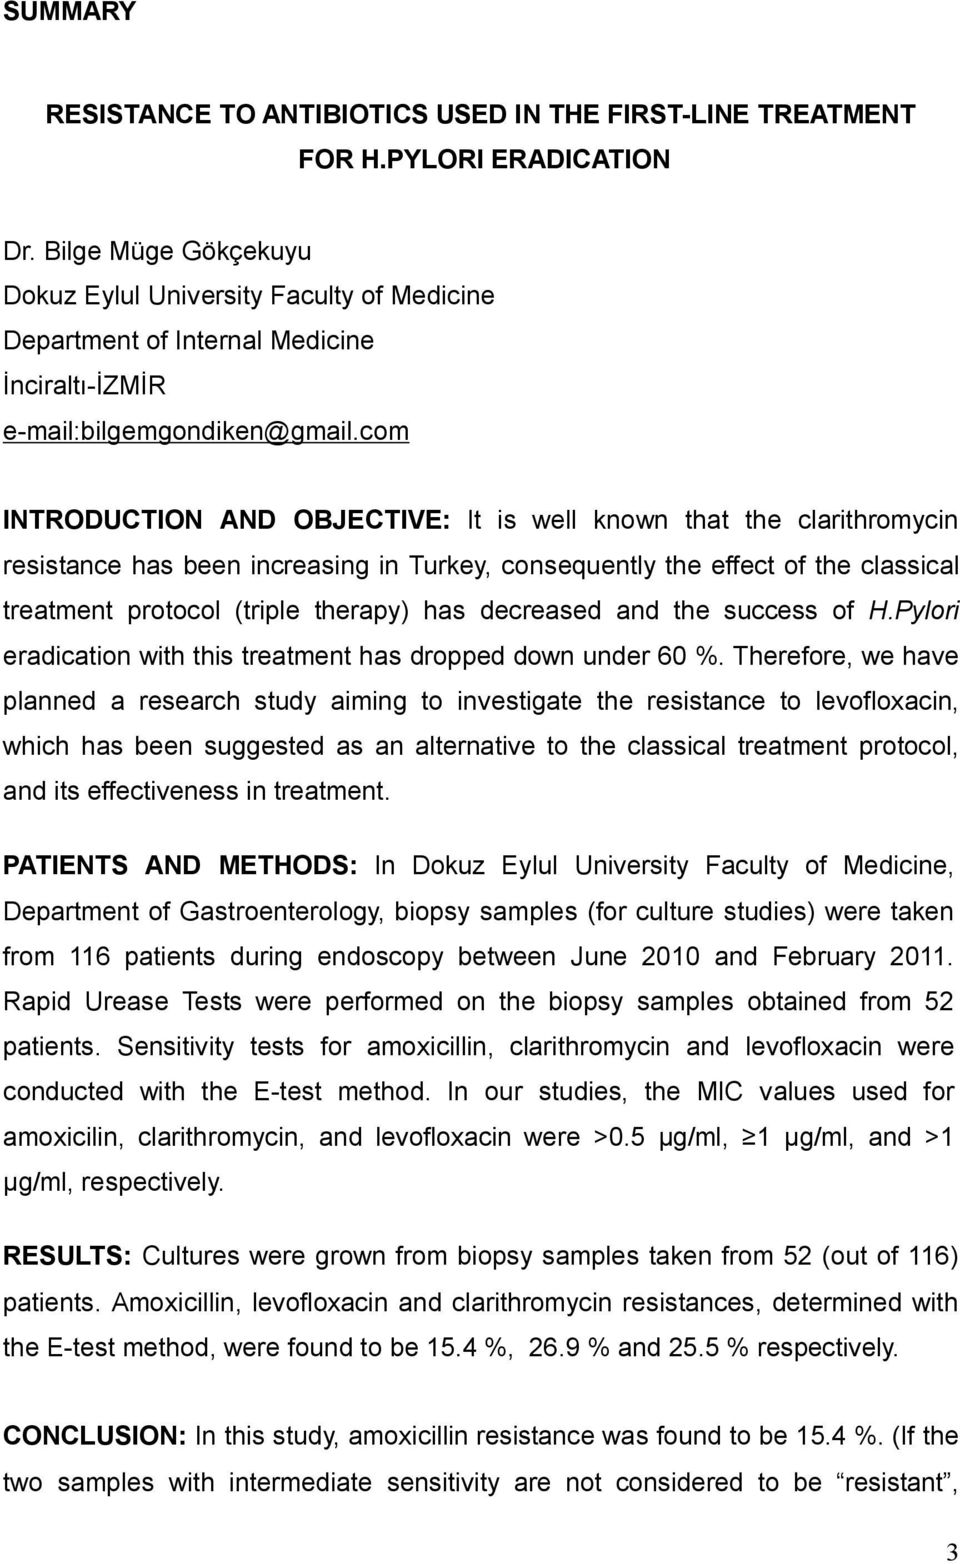 com INTRODUCTION AND OBJECTIVE: It is well known that the clarithromycin resistance has been increasing in Turkey, consequently the effect of the classical treatment protocol (triple therapy) has